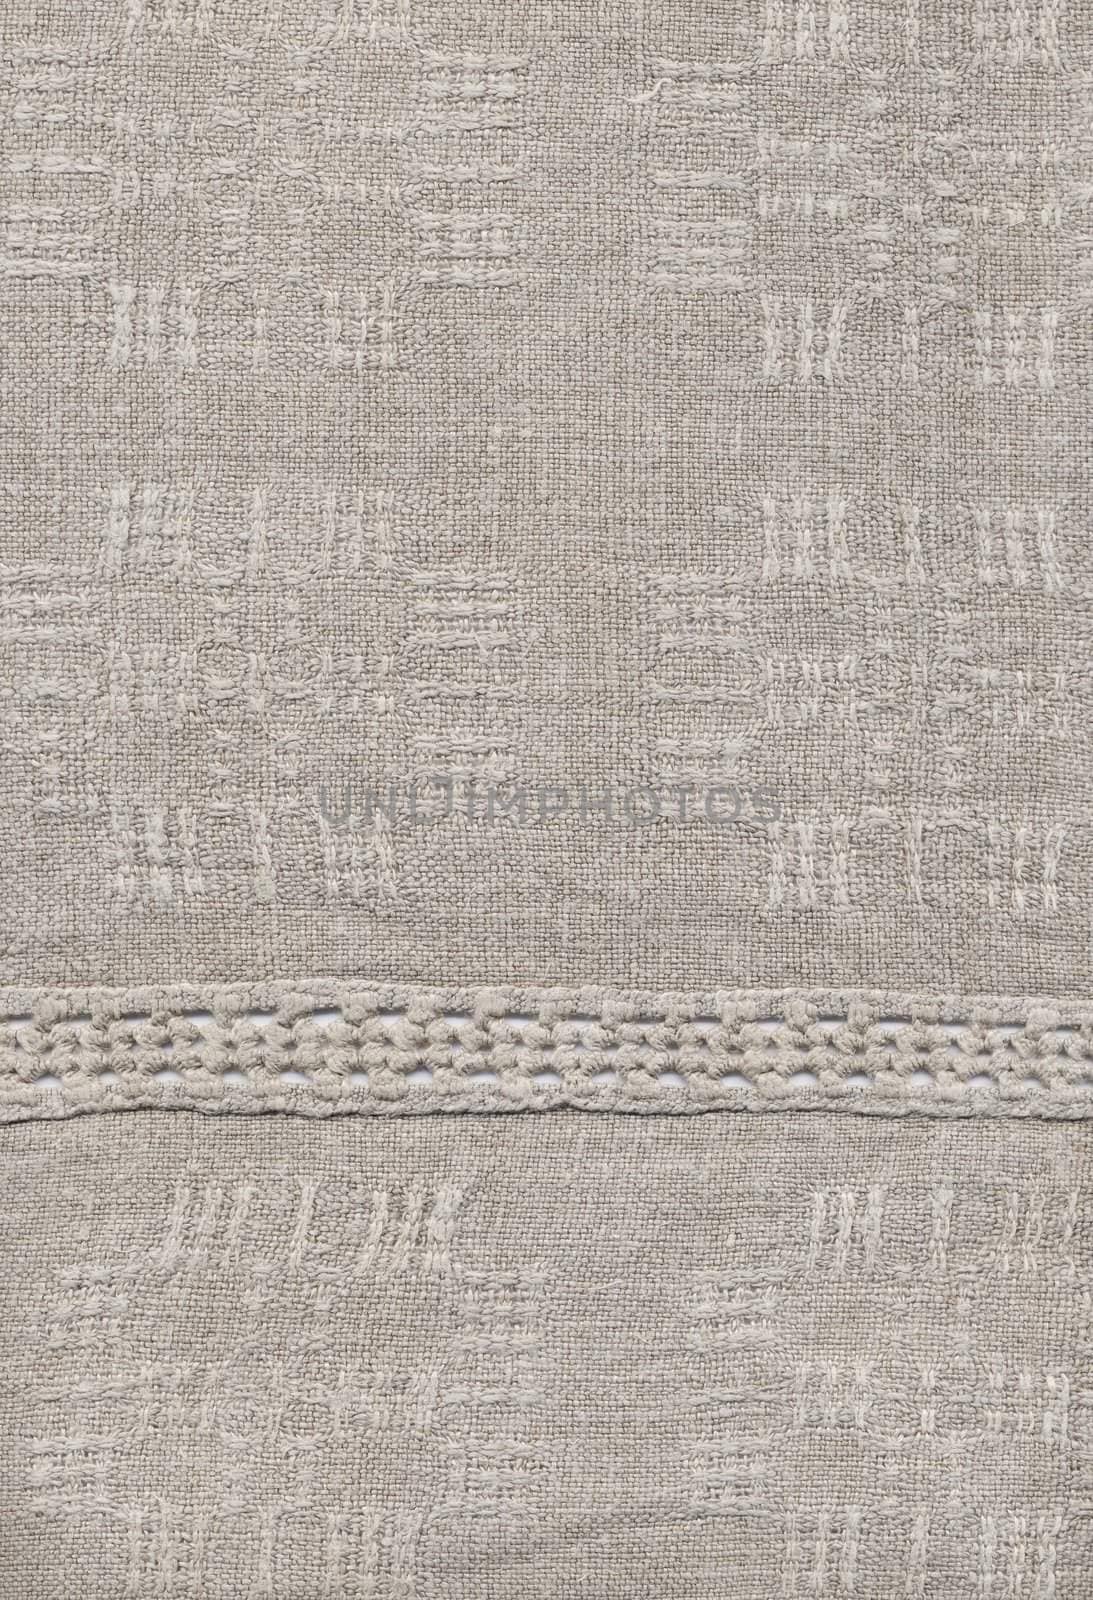 Handmade: fragment of a homespun rural linen cloth on a dining table, 40 years of 20 centuries, Ukraine, USSR. Wrong side